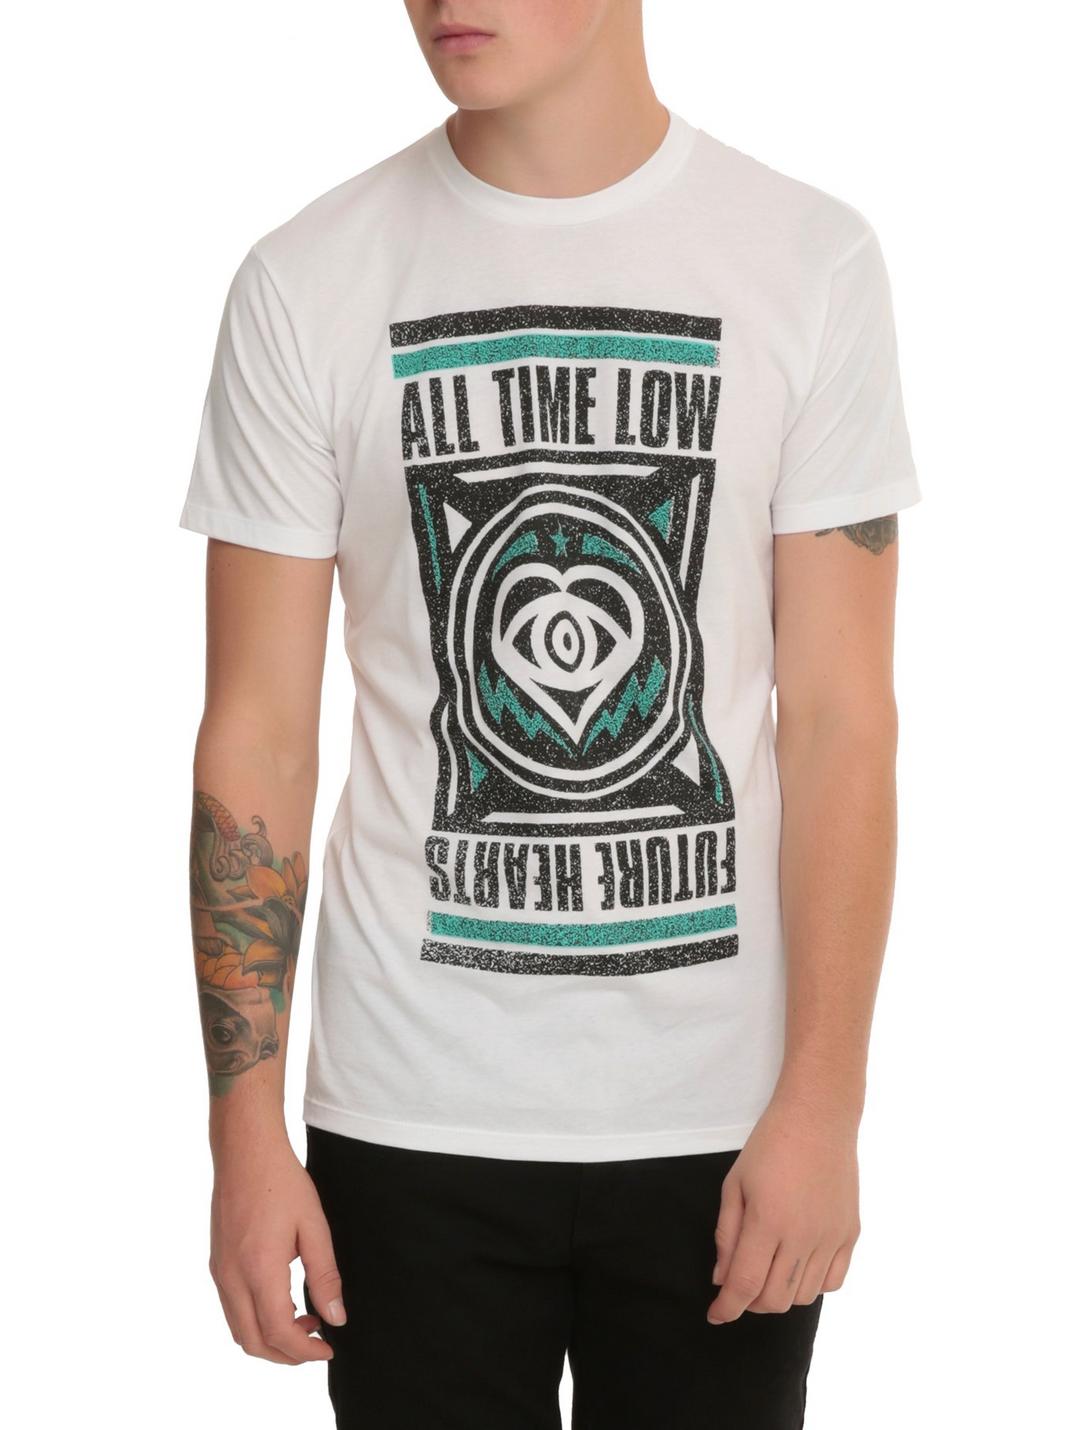 All Time Low Future Hearts T-Shirt, WHITE, hi-res